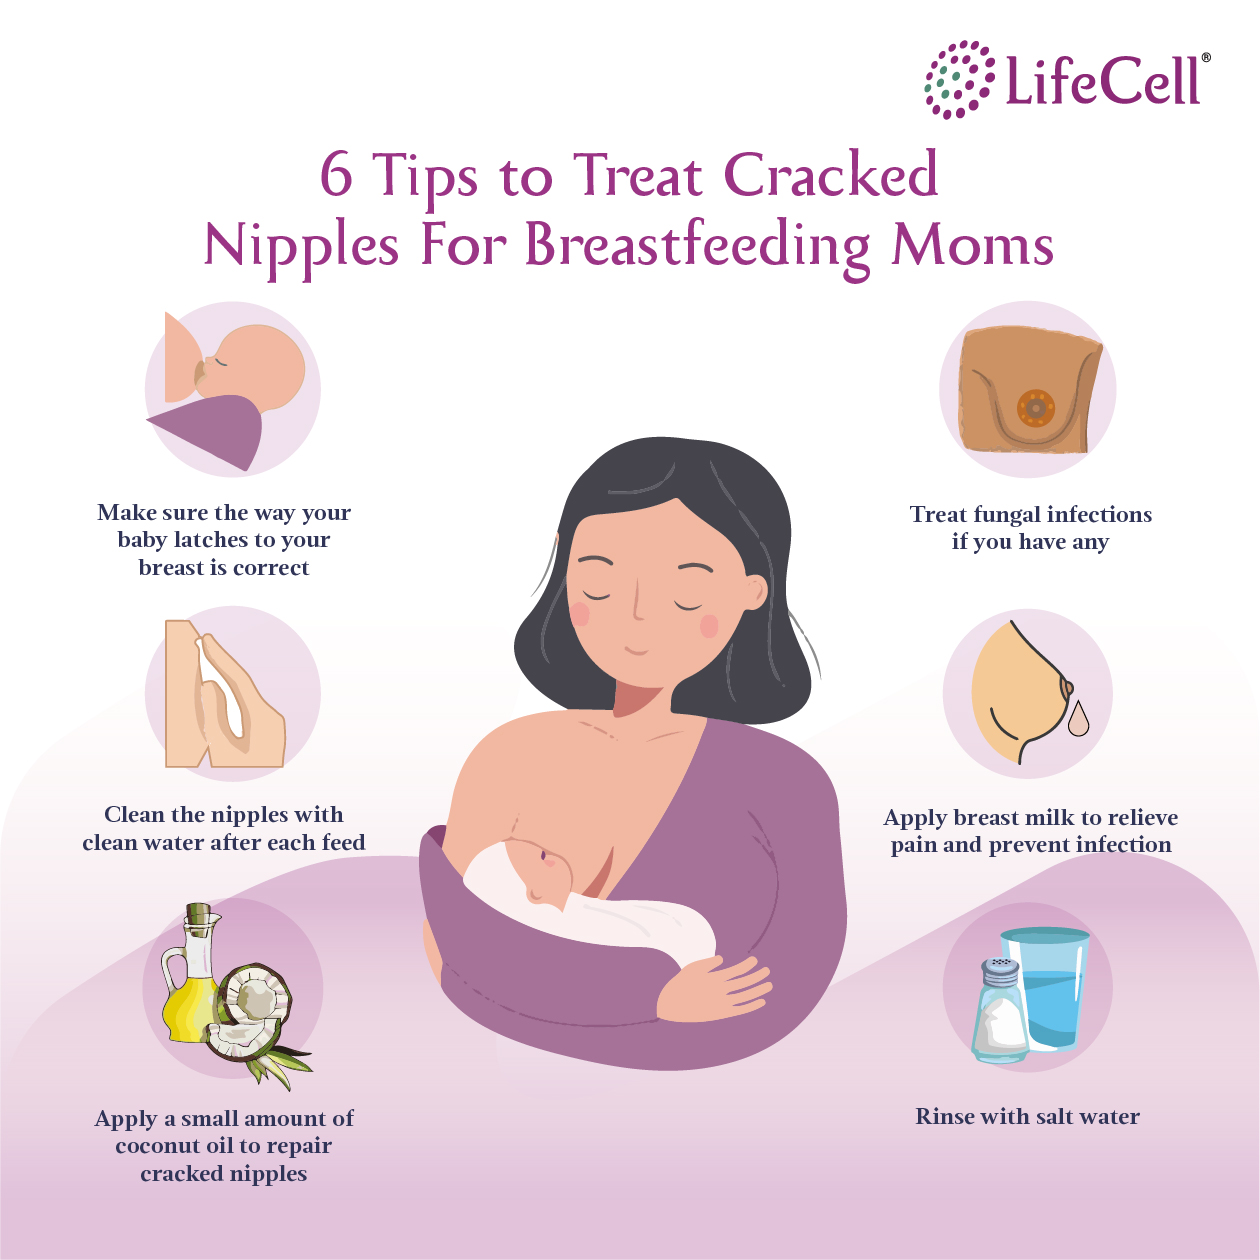 How to Relieve Breastfeeding Pain: Advice for When Breastfeeding Hurts